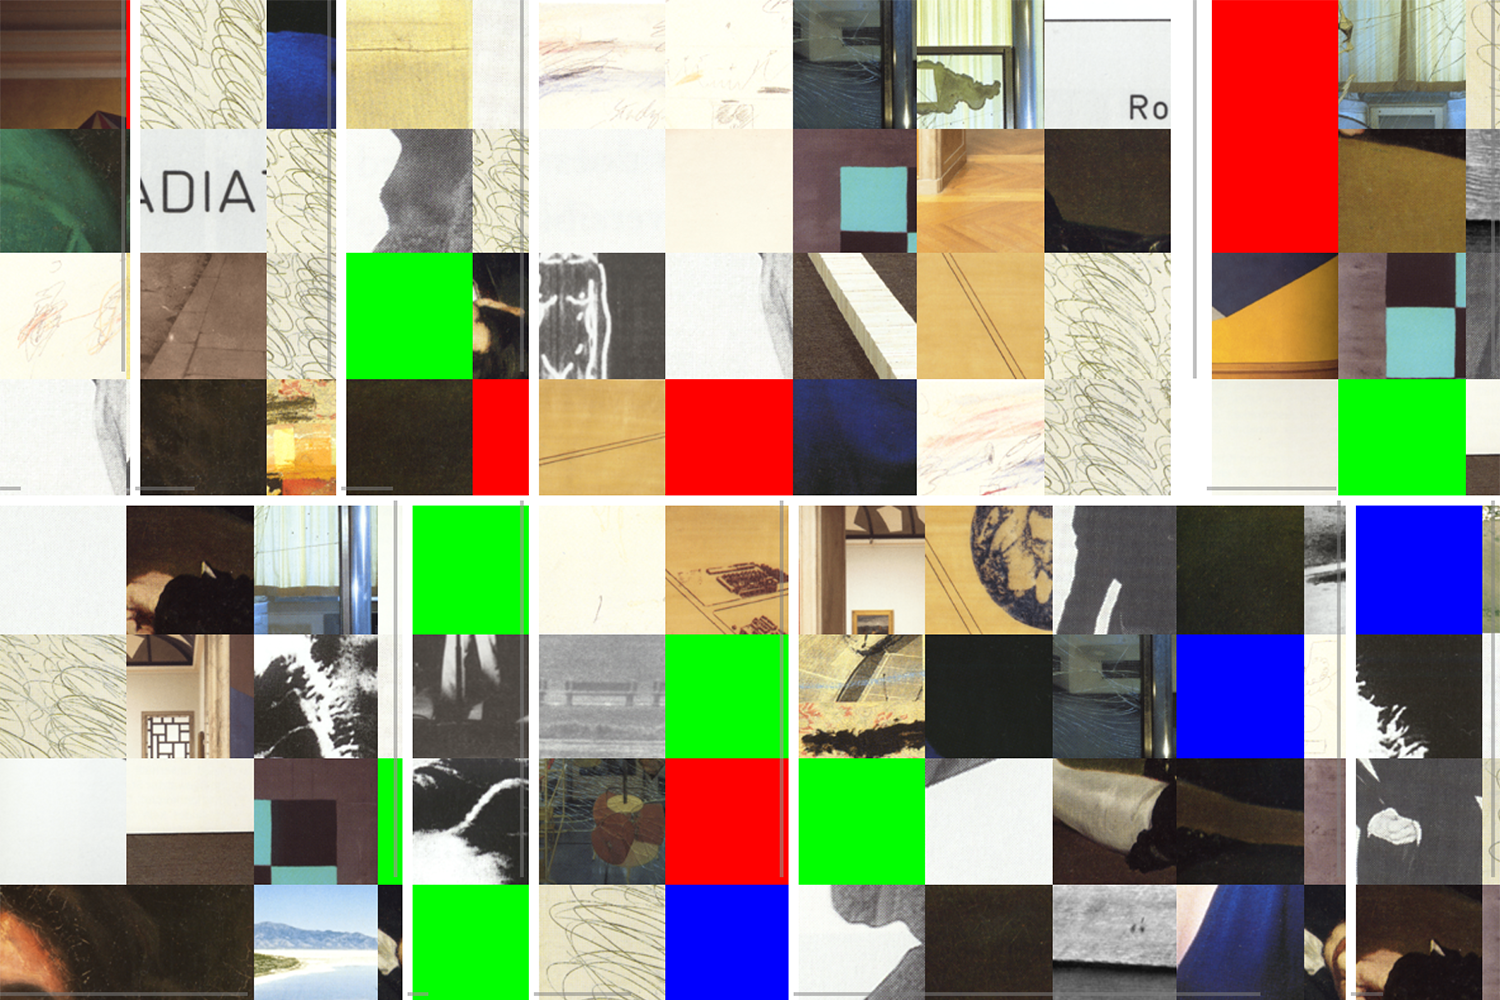 Screenshot of a pattern of a colorful gird of squares and rectangles, some of which are solid green, blue, and red, and others are photographs or other images.